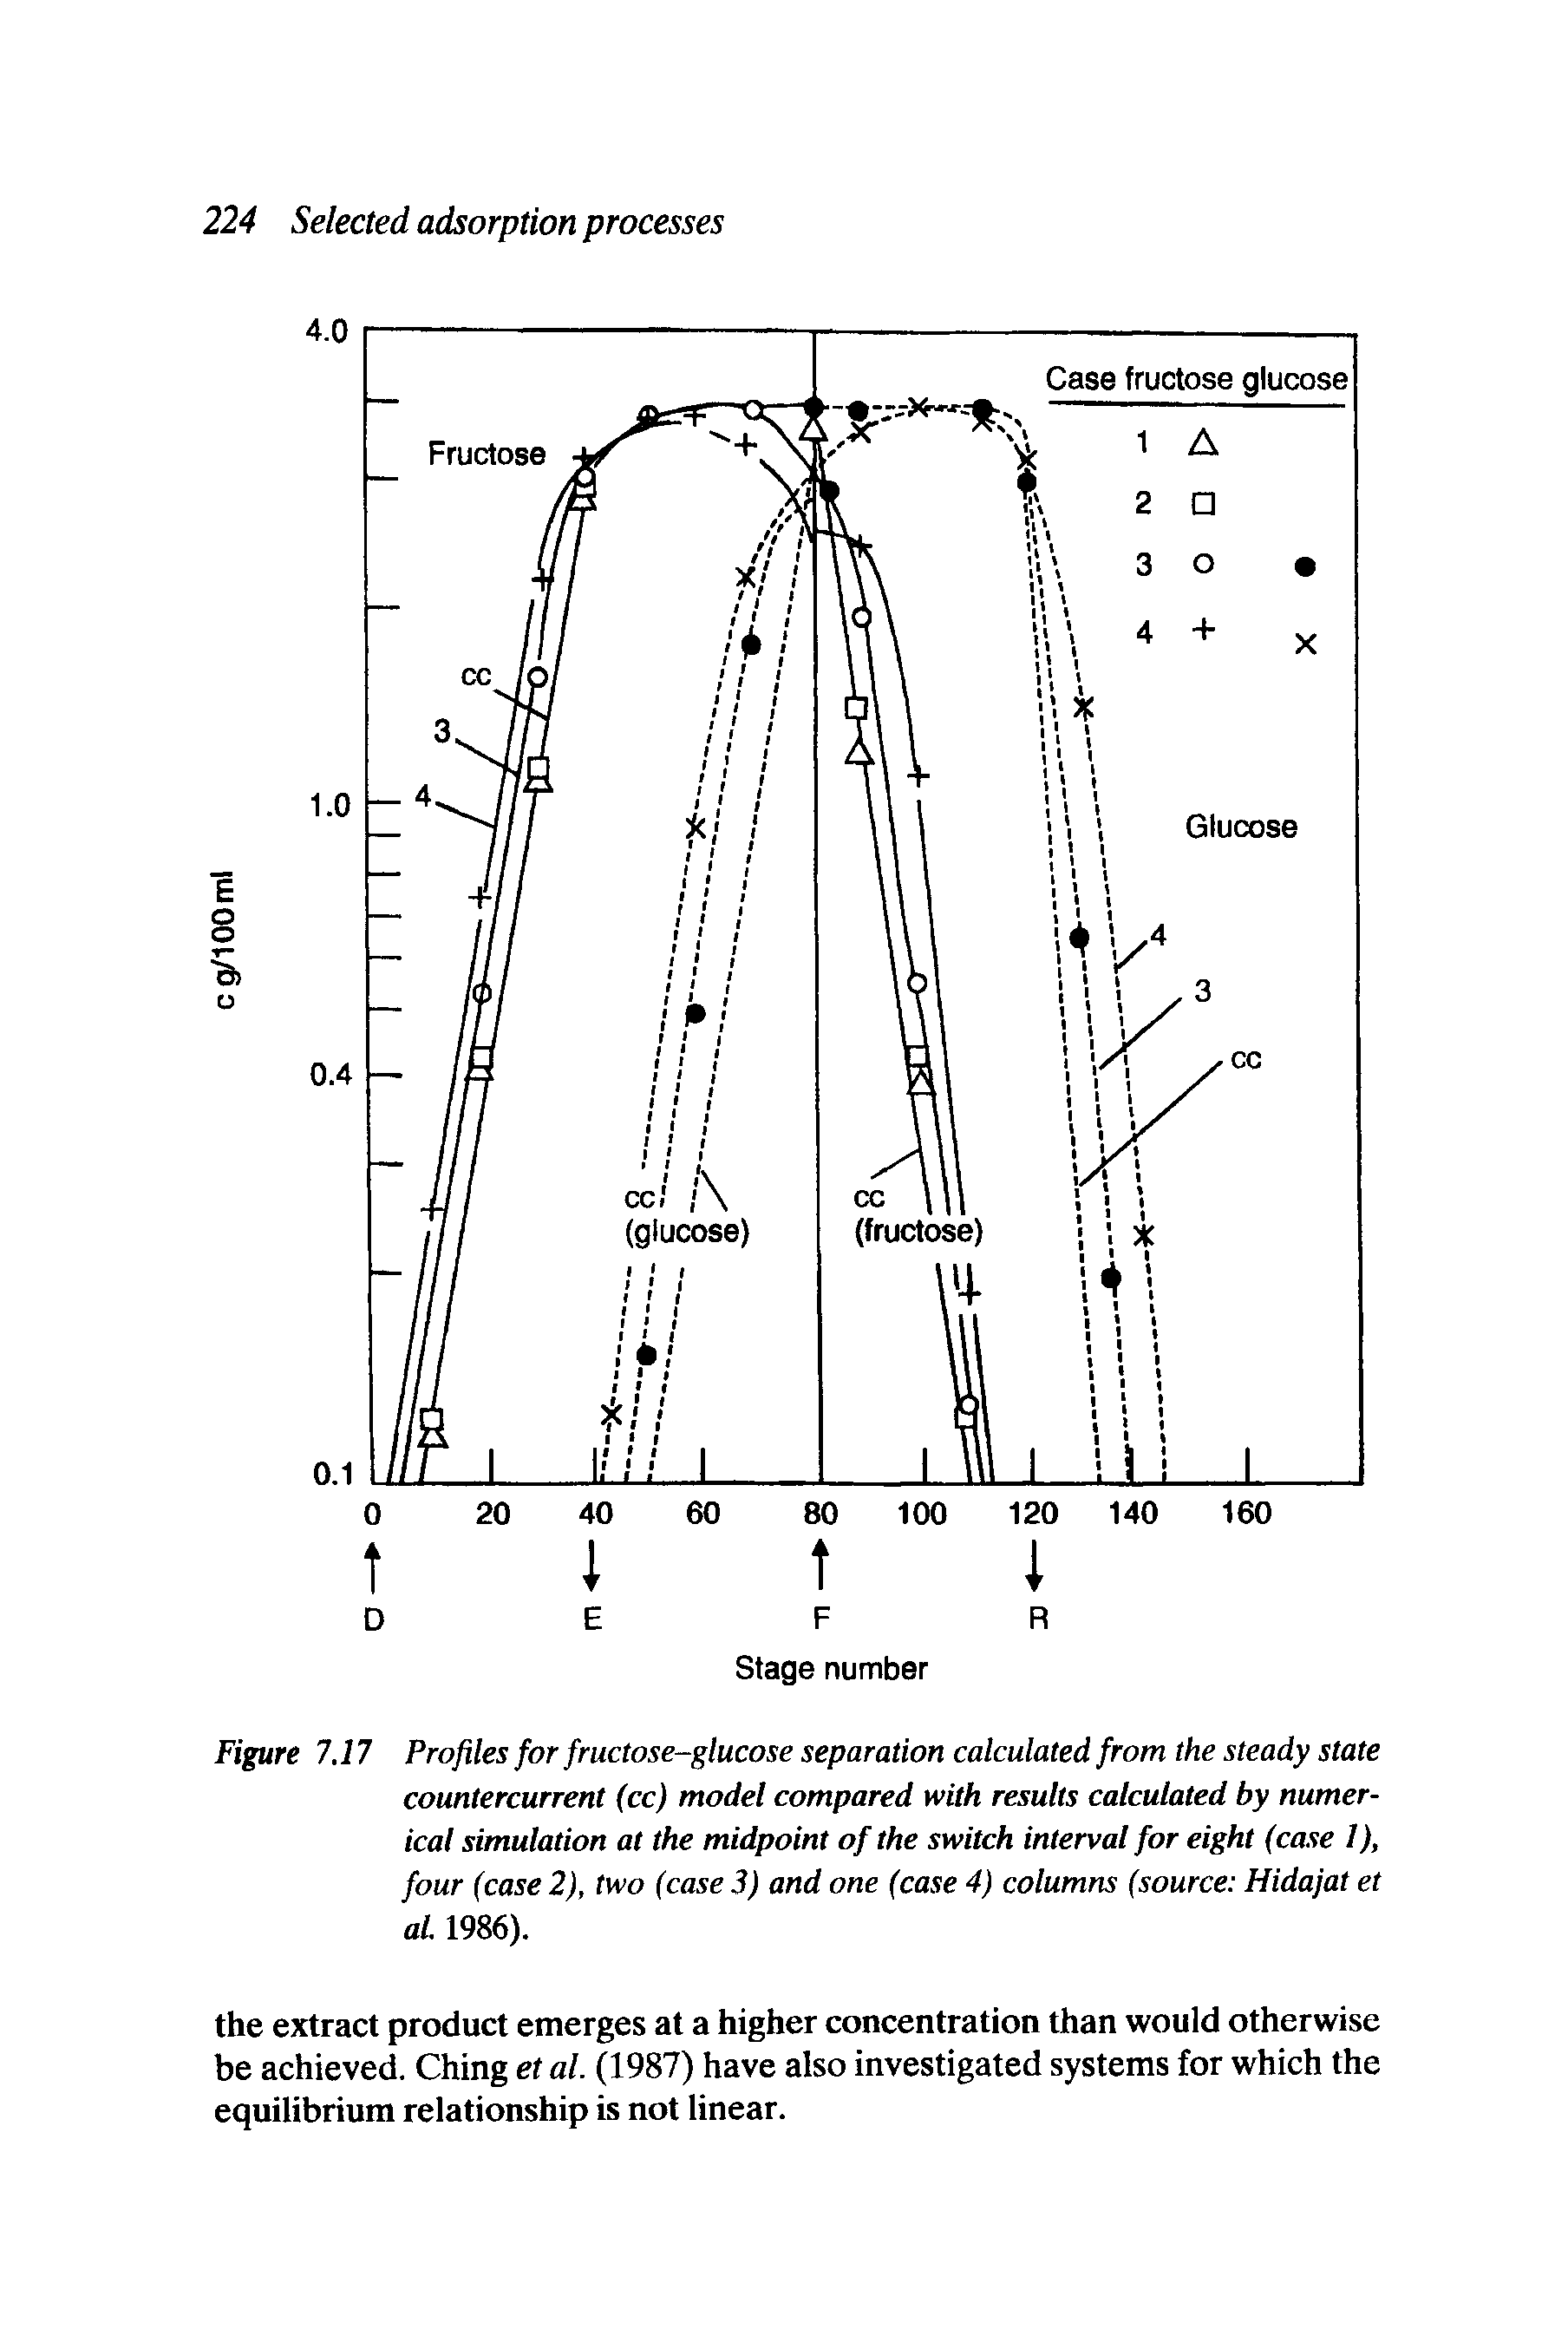 Figure 7.17 Profiles for fructose-glucose separation calculated from the steady state countercurrent (cc) model compared with results calculated by numerical simulation at the midpoint of the switch interval for eight (case 1), four (case 2), two (case 3) and one (case 4) columns (source Hidajat et oL 1986).